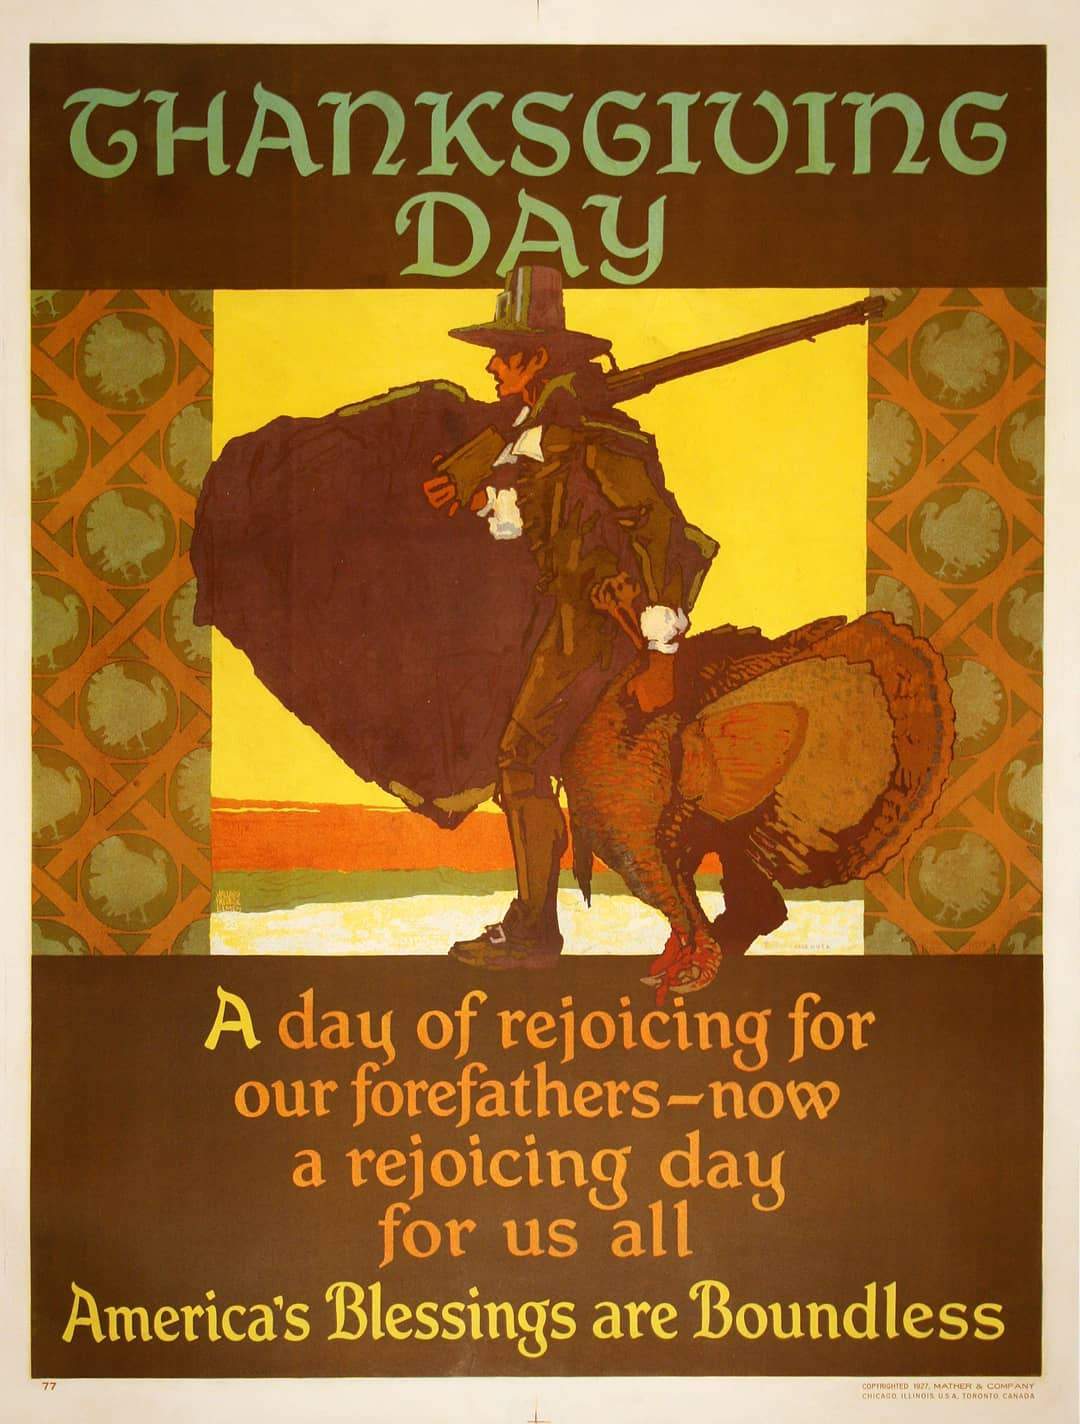 Original Mather Work Incentive Poster 1927 by Elmes - Thanksgiving Day - America's Blessings